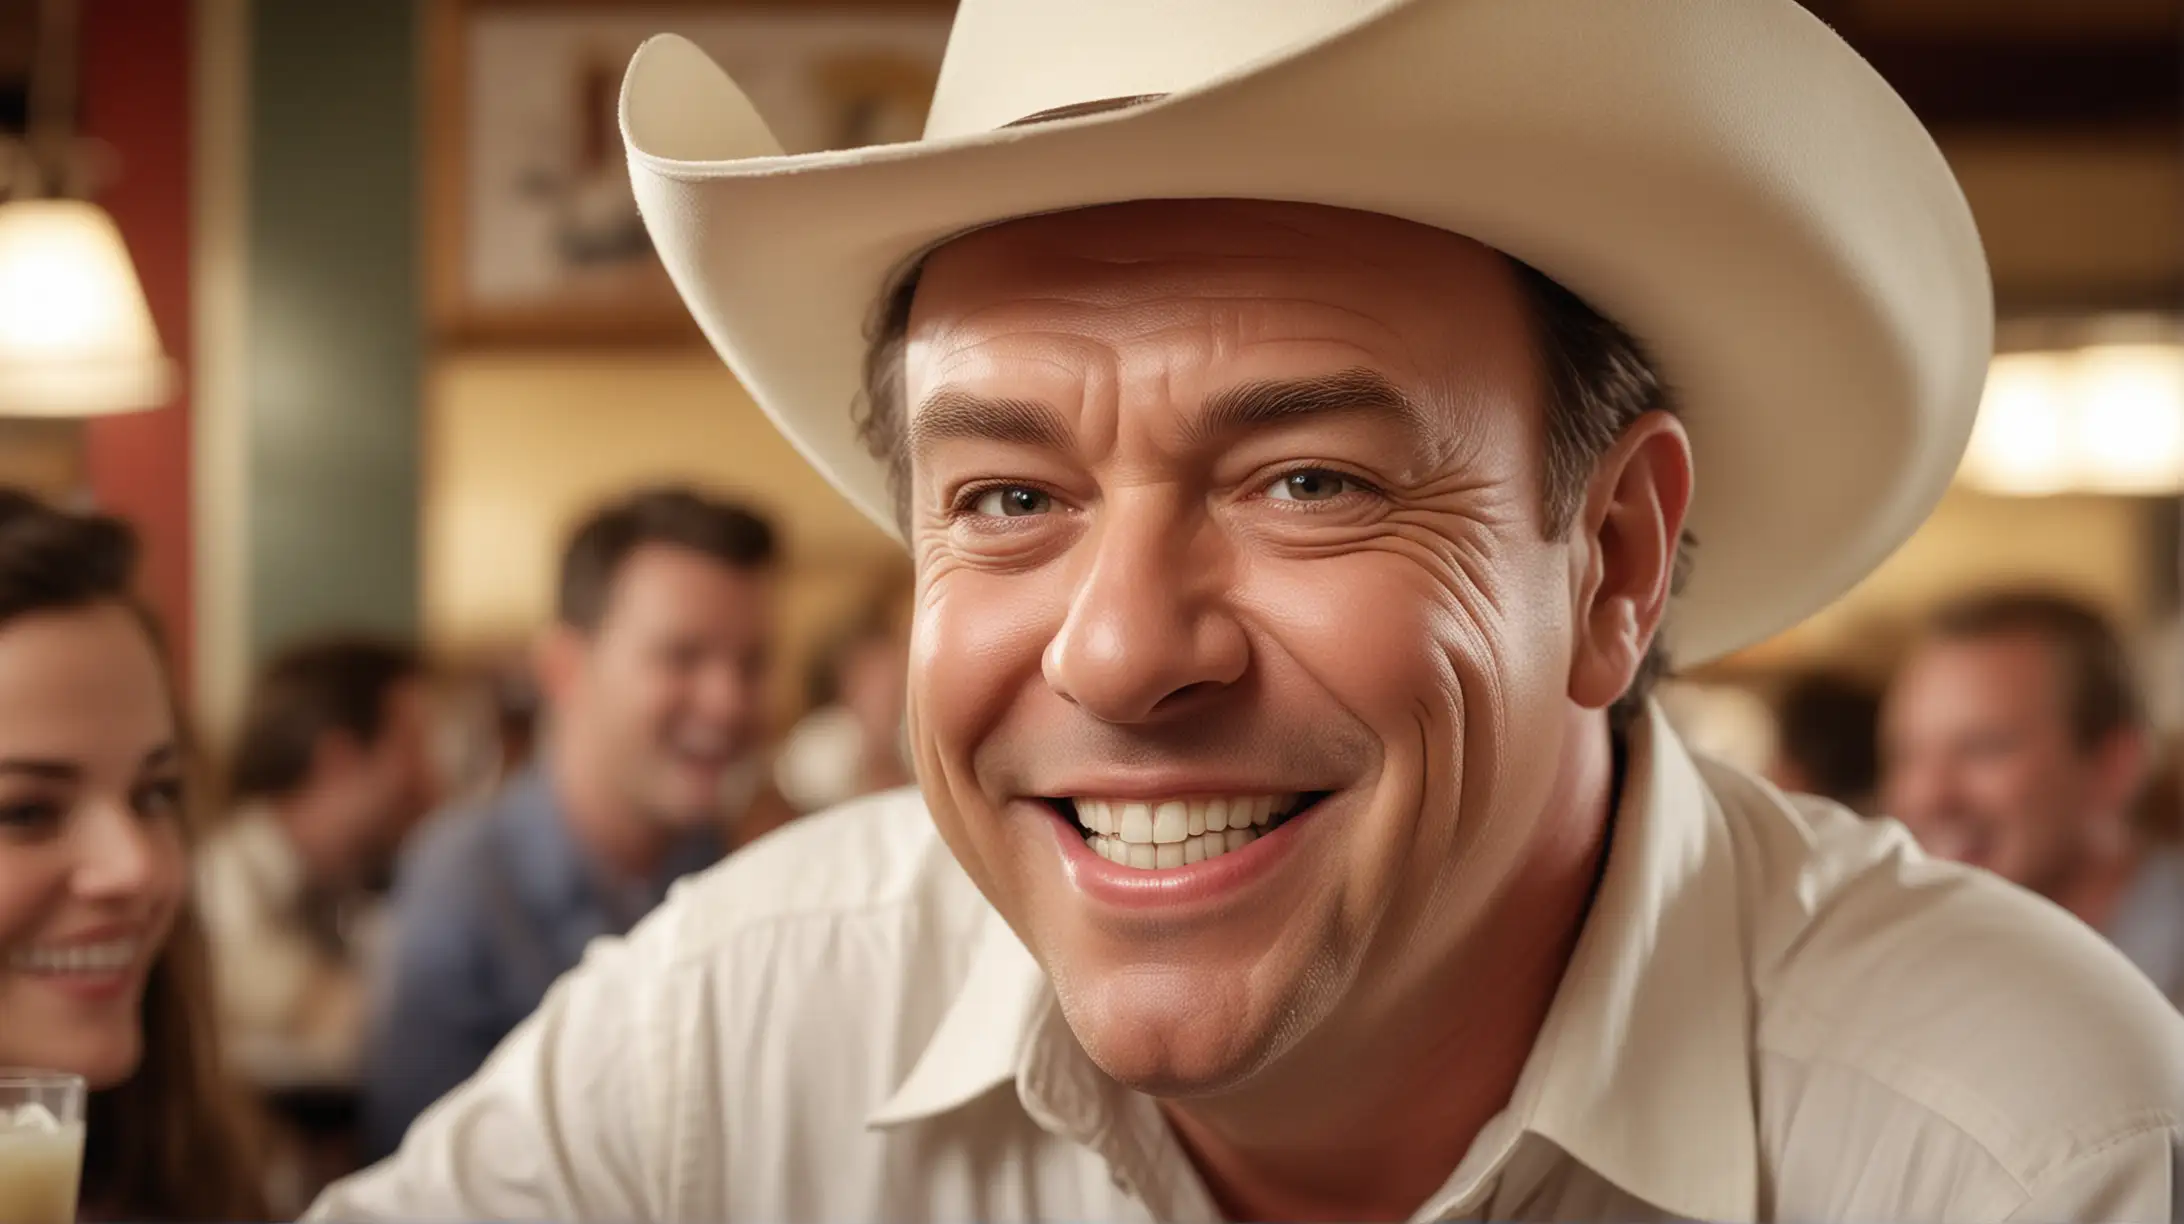 Goofy Cowboy Hat Portrait at Busy Diner Tom Arnold Lookalike with Toothpick Smile